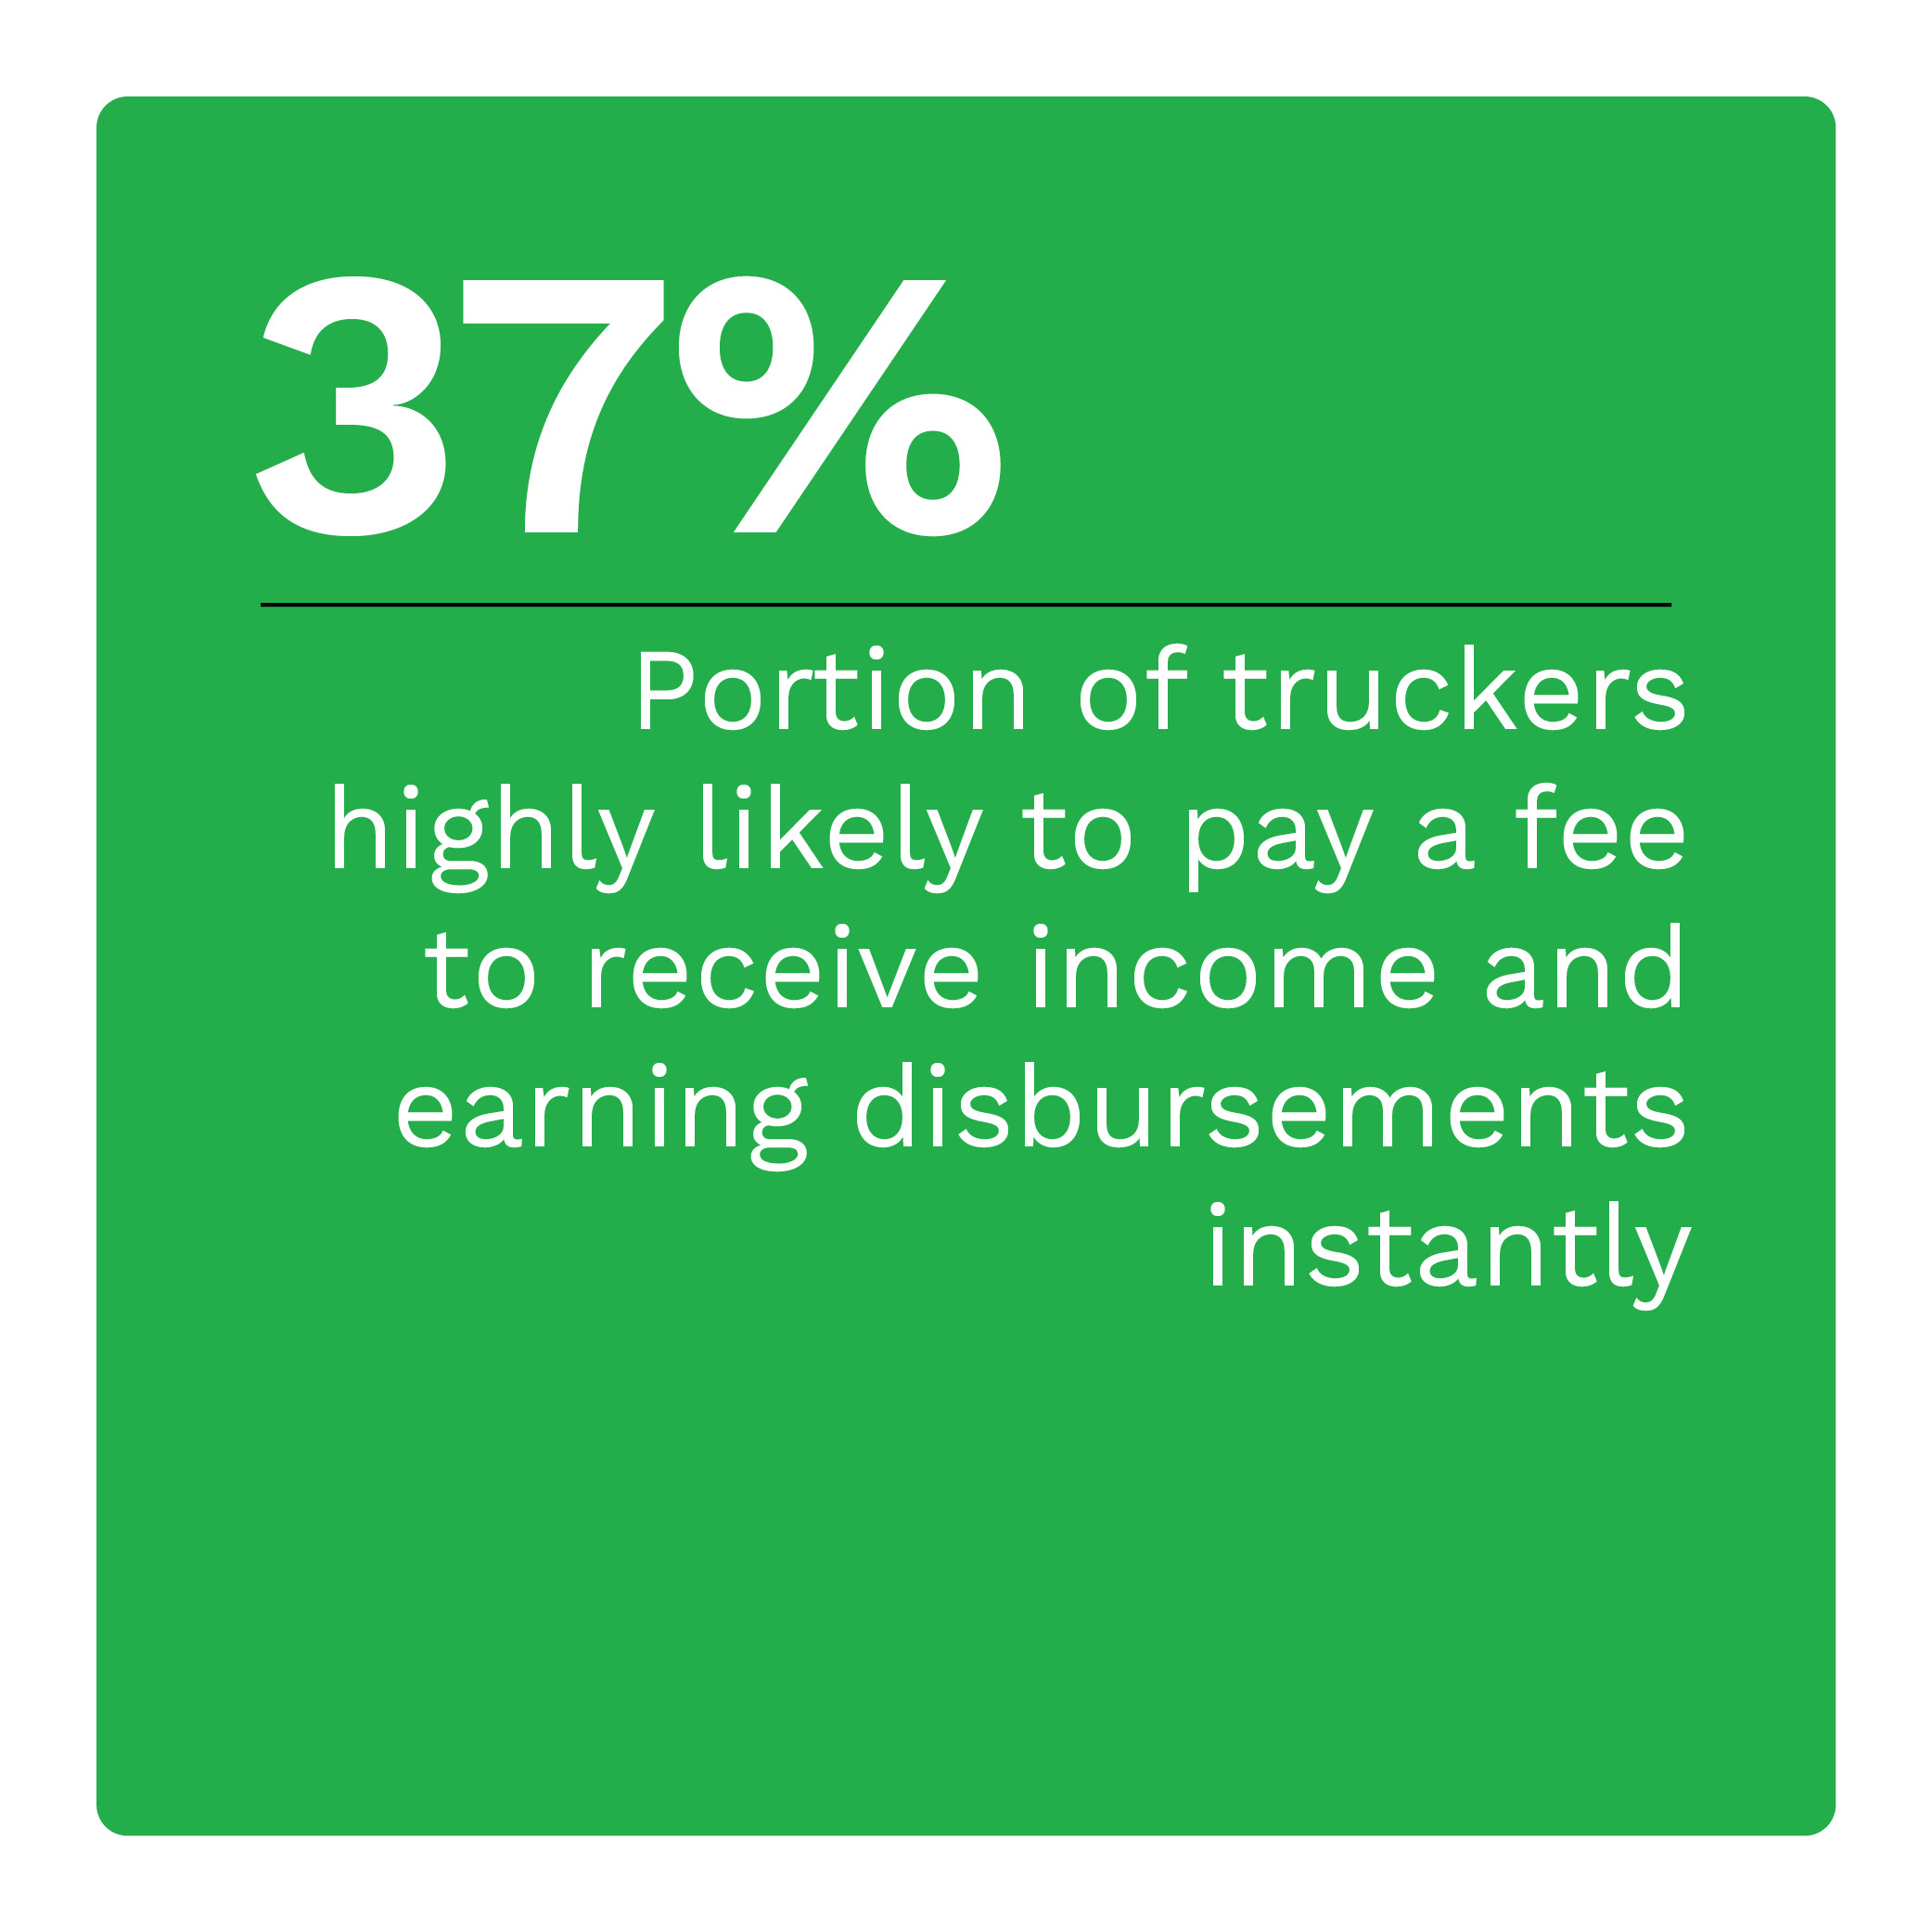  Portion of truckers highly likely to pay a fee to receive income and earning disbursements instantly 